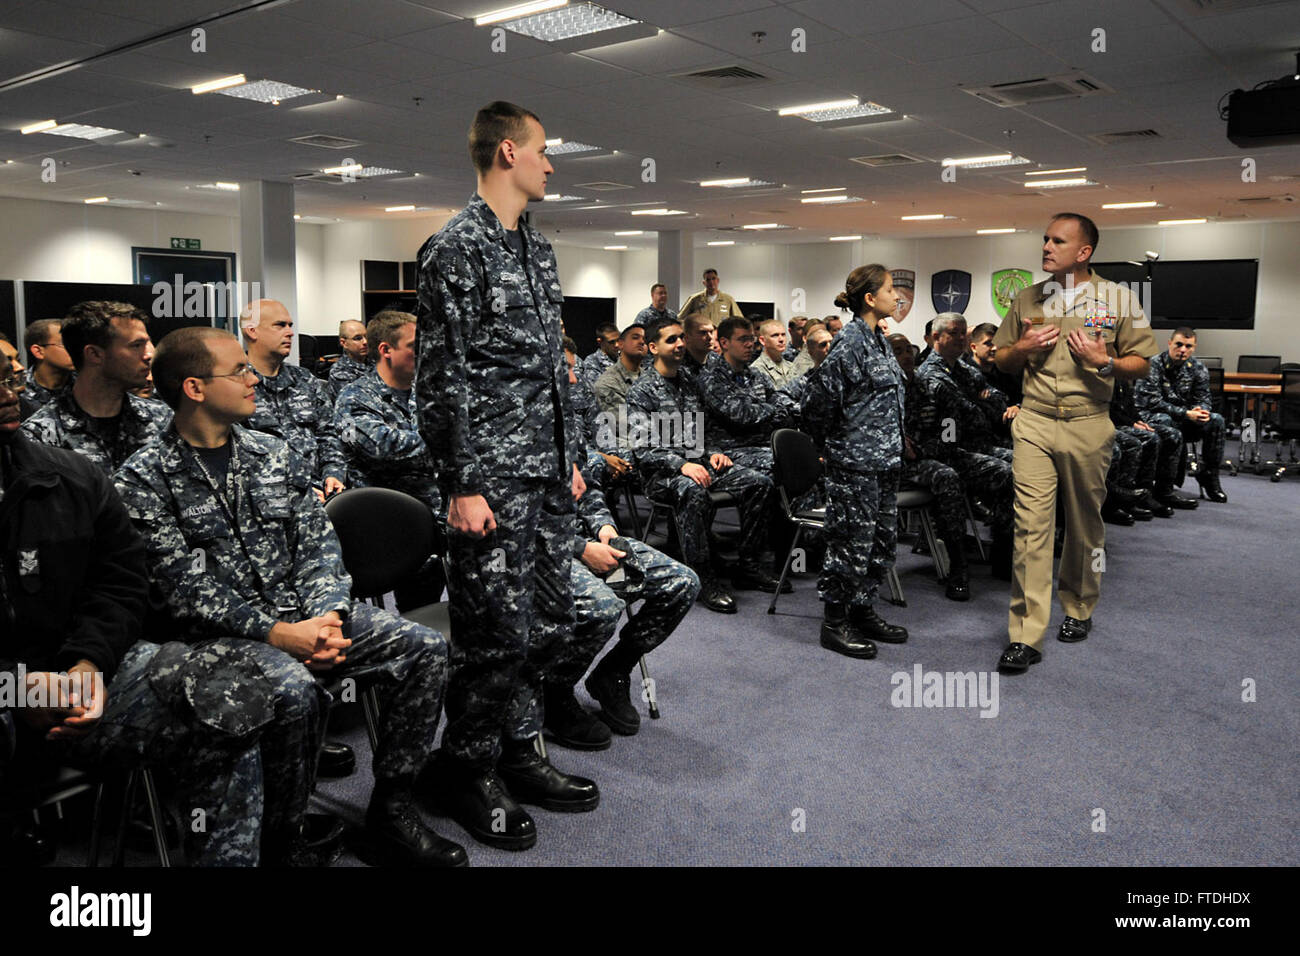 151027-F-LG169-011 RAF MOLESWORTH, United Kingdom (Oct. 27 2015) U.S. Naval Forces Europe-Africa Fleet Master Chief Steven Giordano, far right, speaks with servicemembers assigned to the Joint Intelligence Operations Center, Europe Analytic Center  during an all-hands call at RAF Molesworth, United Kingdom, Oct. 27, 2015. U.S. Naval Forces Europe-Africa, headquartered in Naples, Italy, oversees joint and naval operations, often in concert with allied, joint, and interagency partners, in order to advance U.S. national interests, security and stability in Europe and Africa. (U.S. Air Force photo Stock Photo